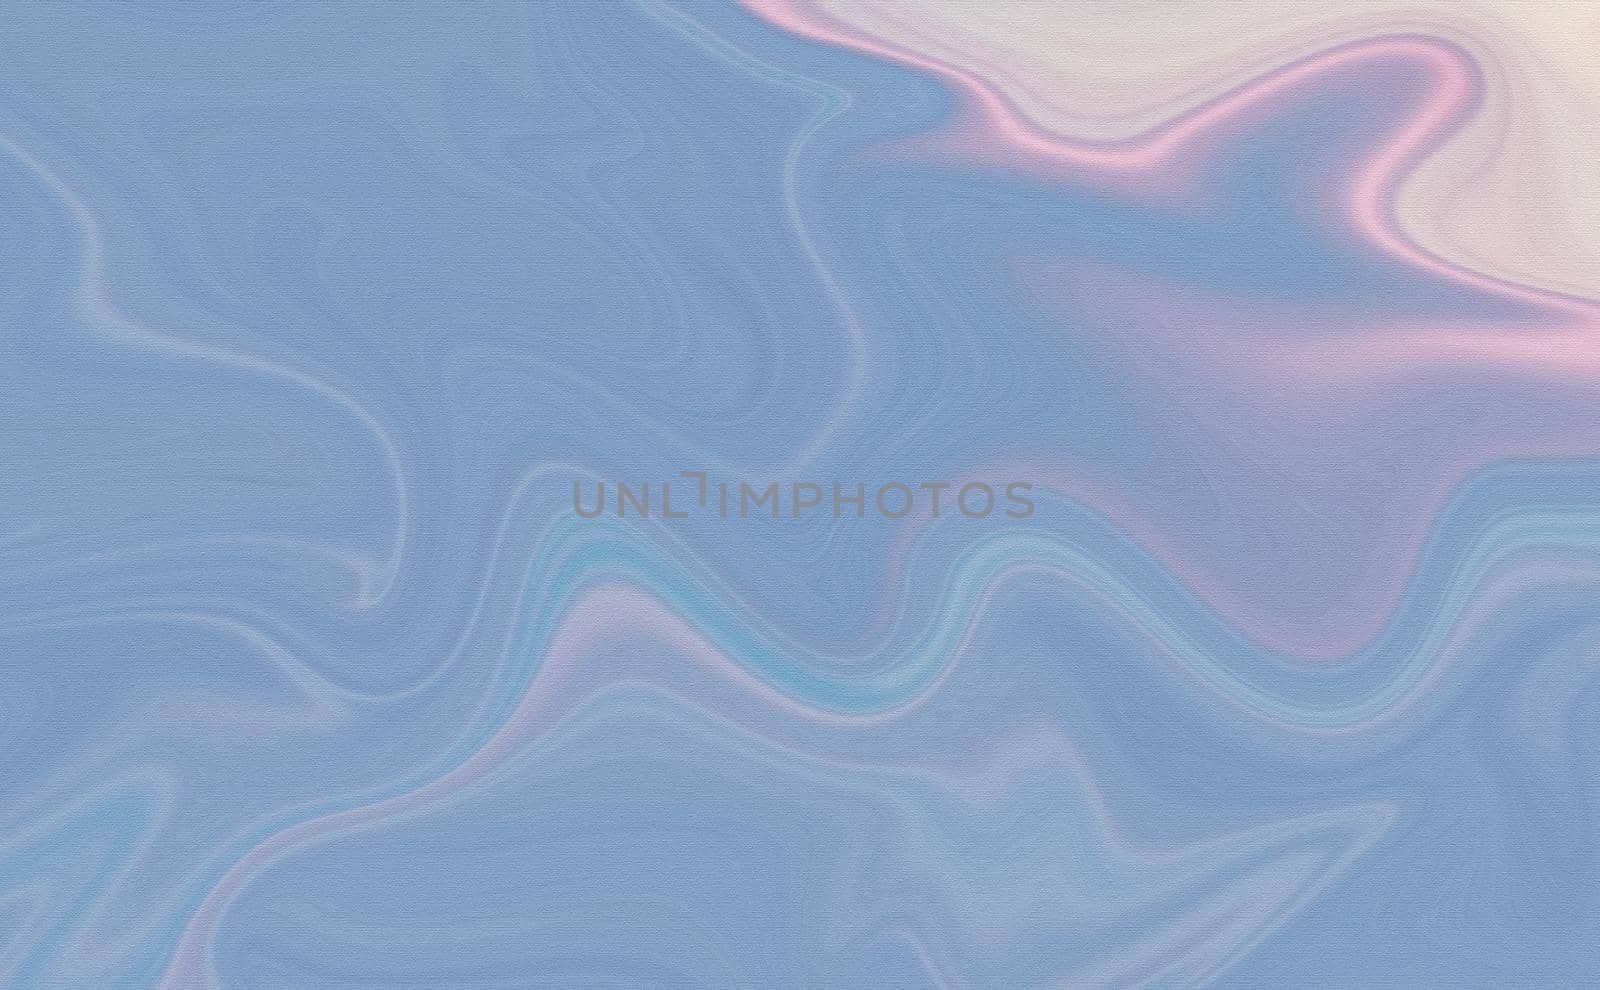 Modern surface, home decoration and contemporary pattern concept - Marbling art texture, luxury marble background for interior design